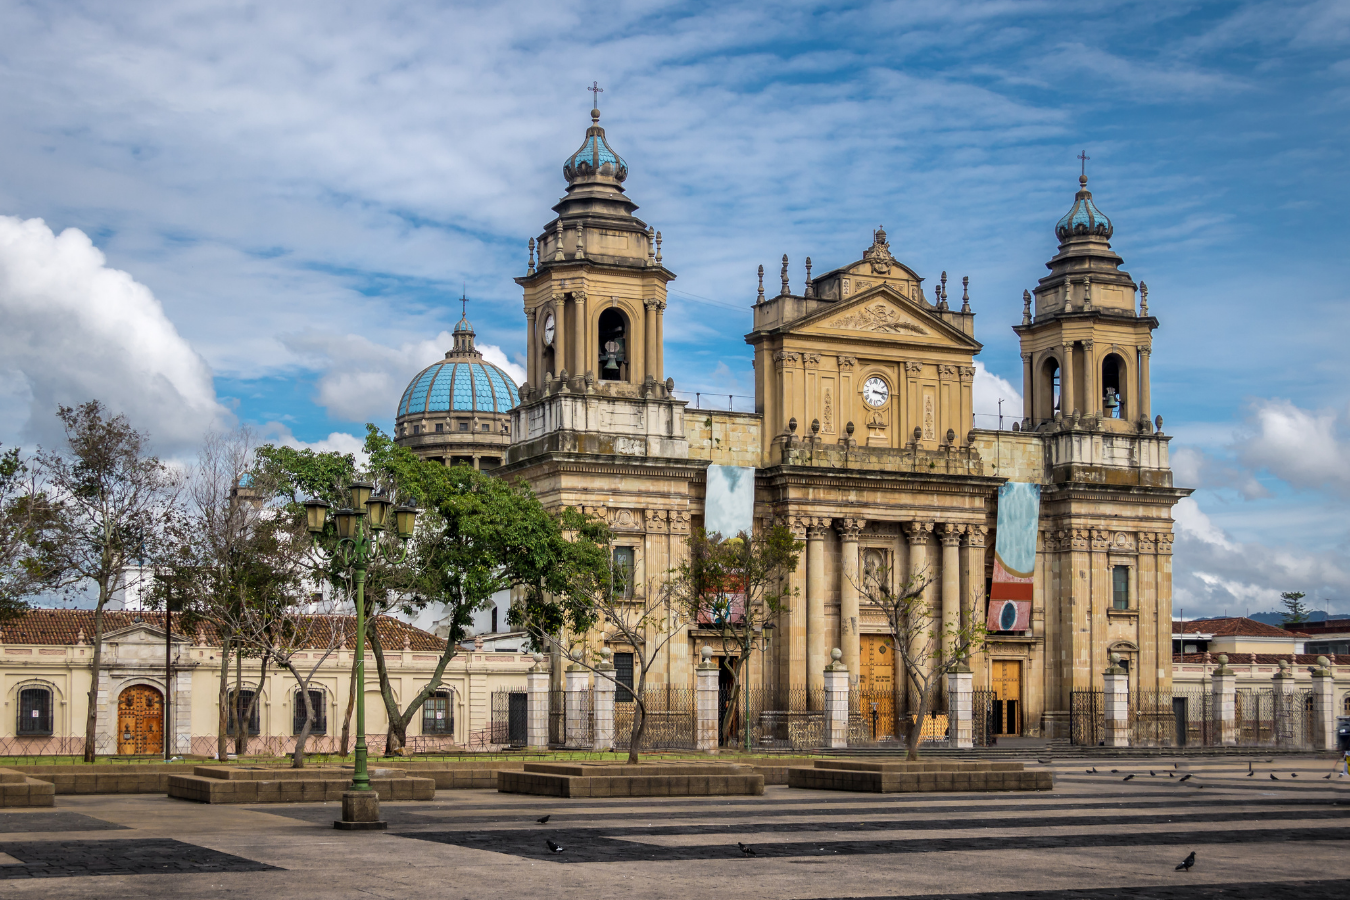 When to go to Guatemala?